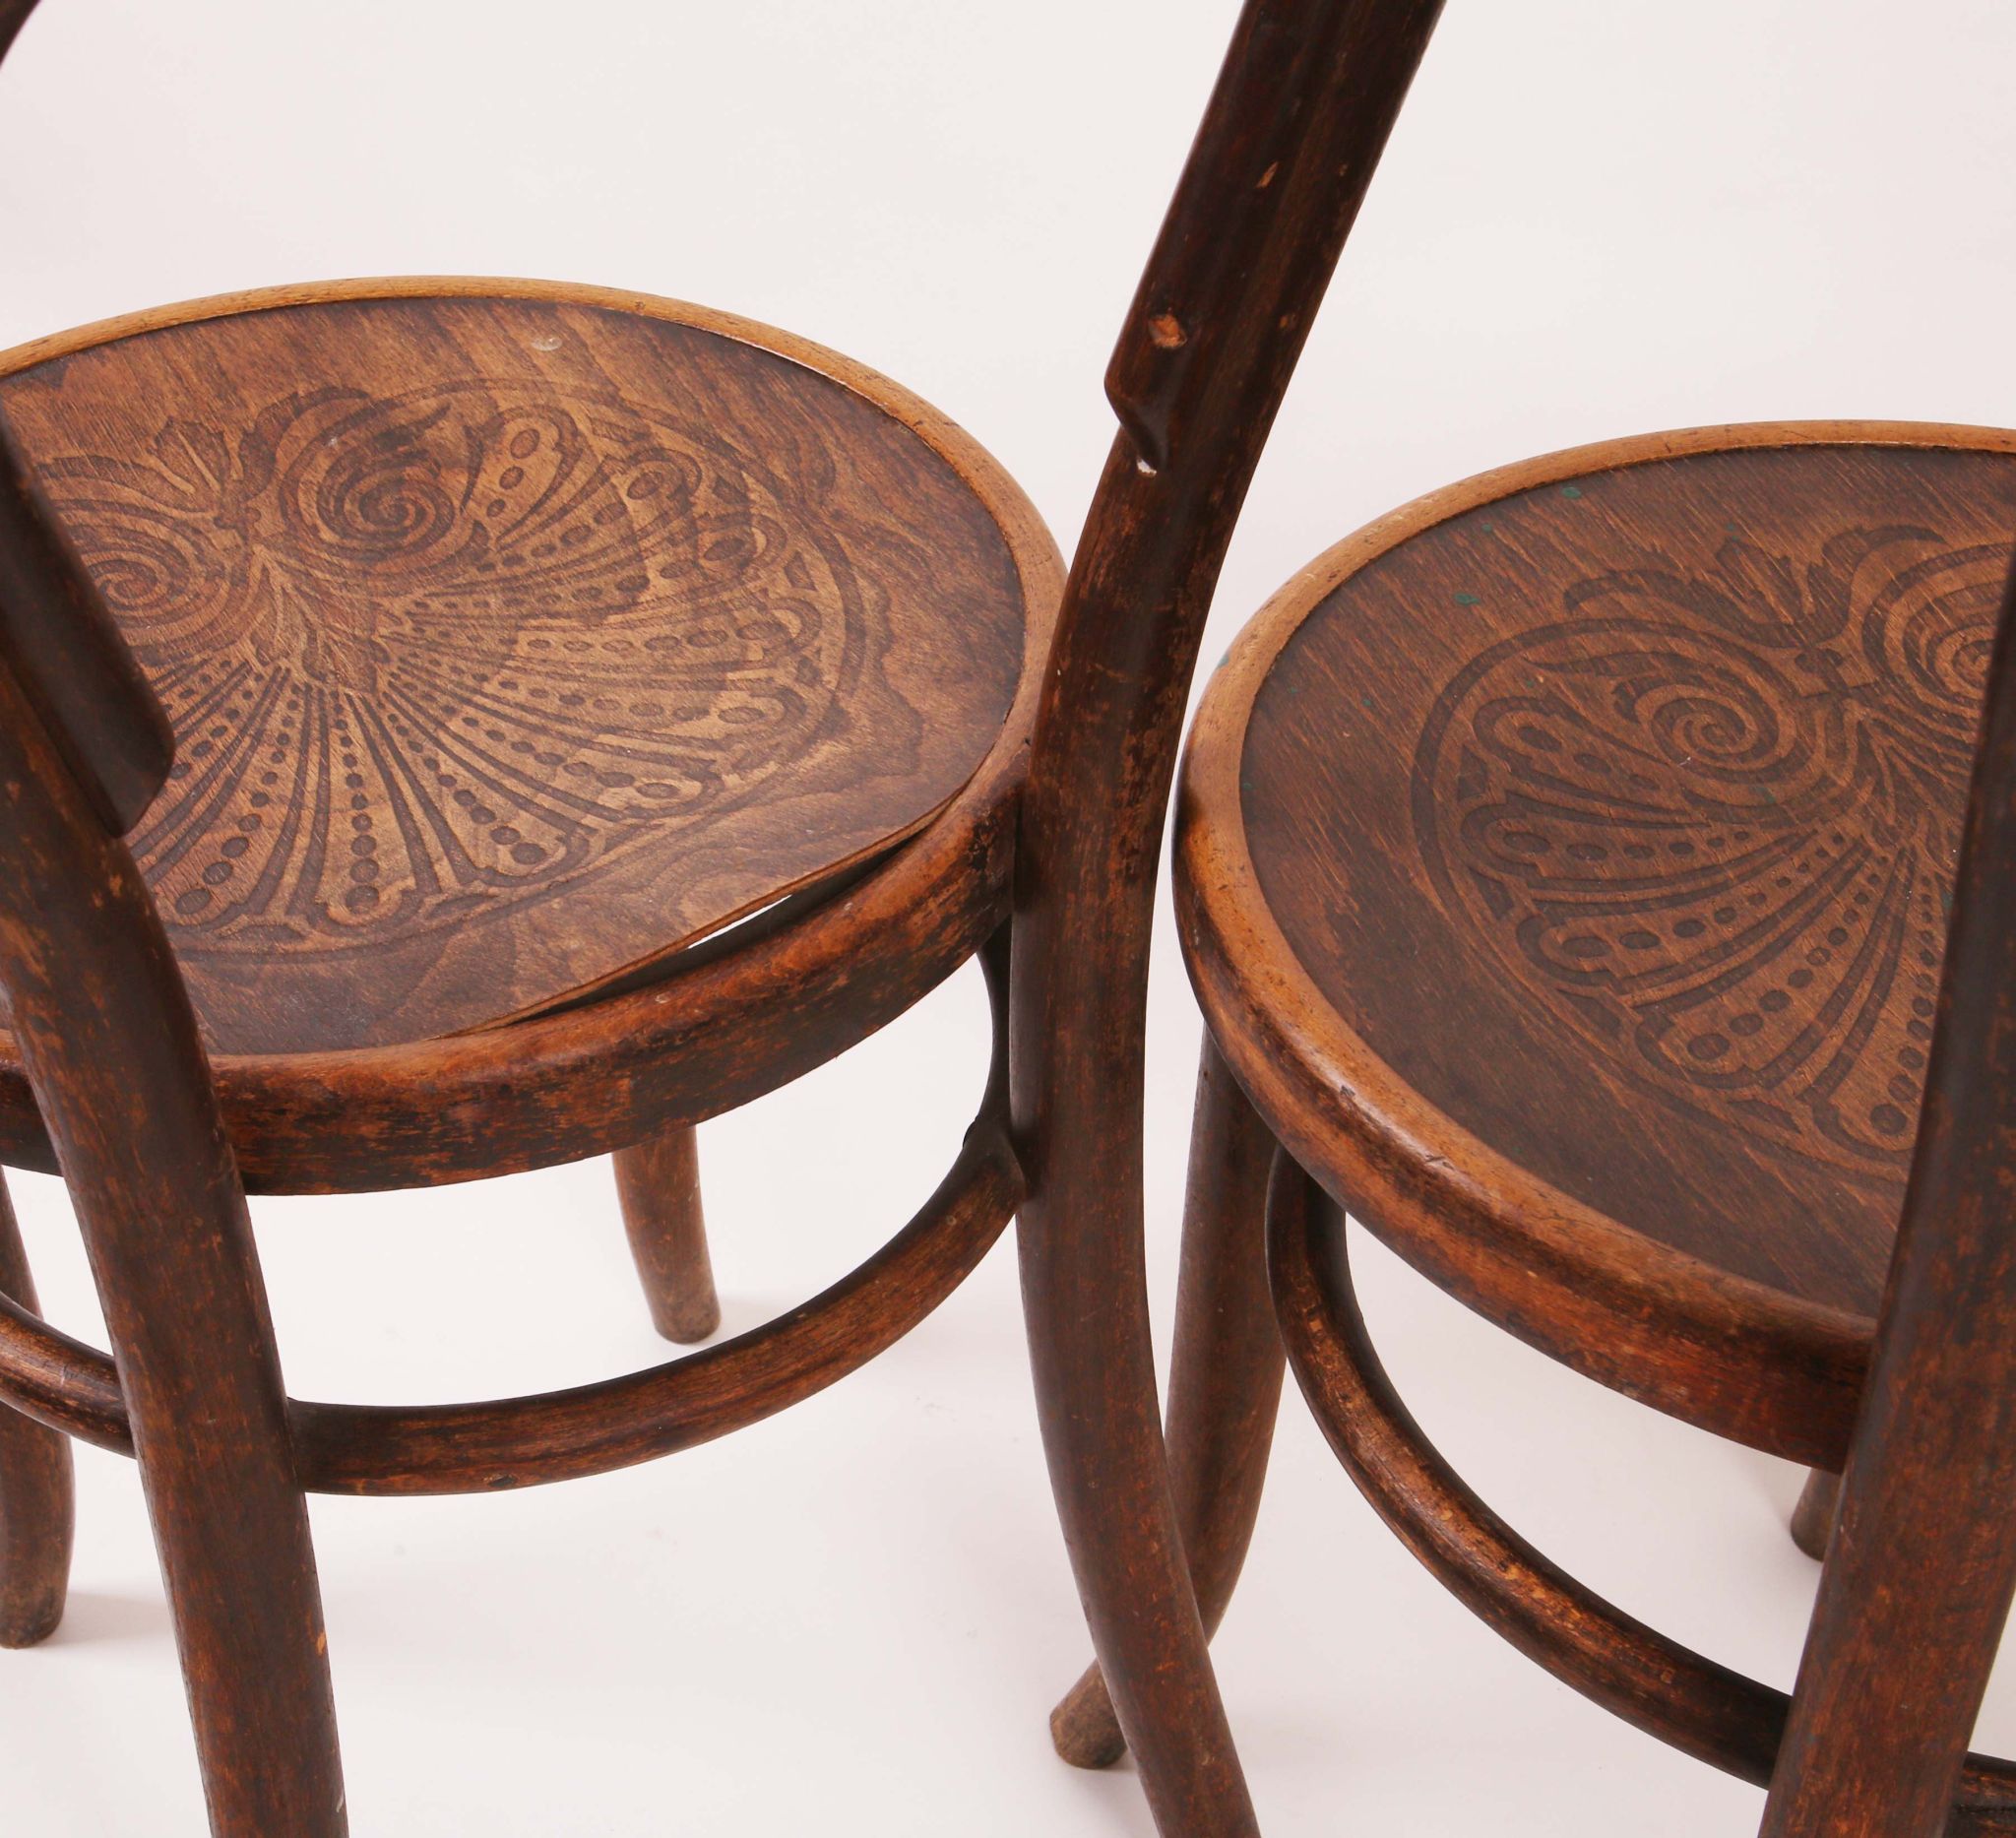 A set of six Thonet bentwood chairs, with paper labels under some chairs. (6) - Image 4 of 4